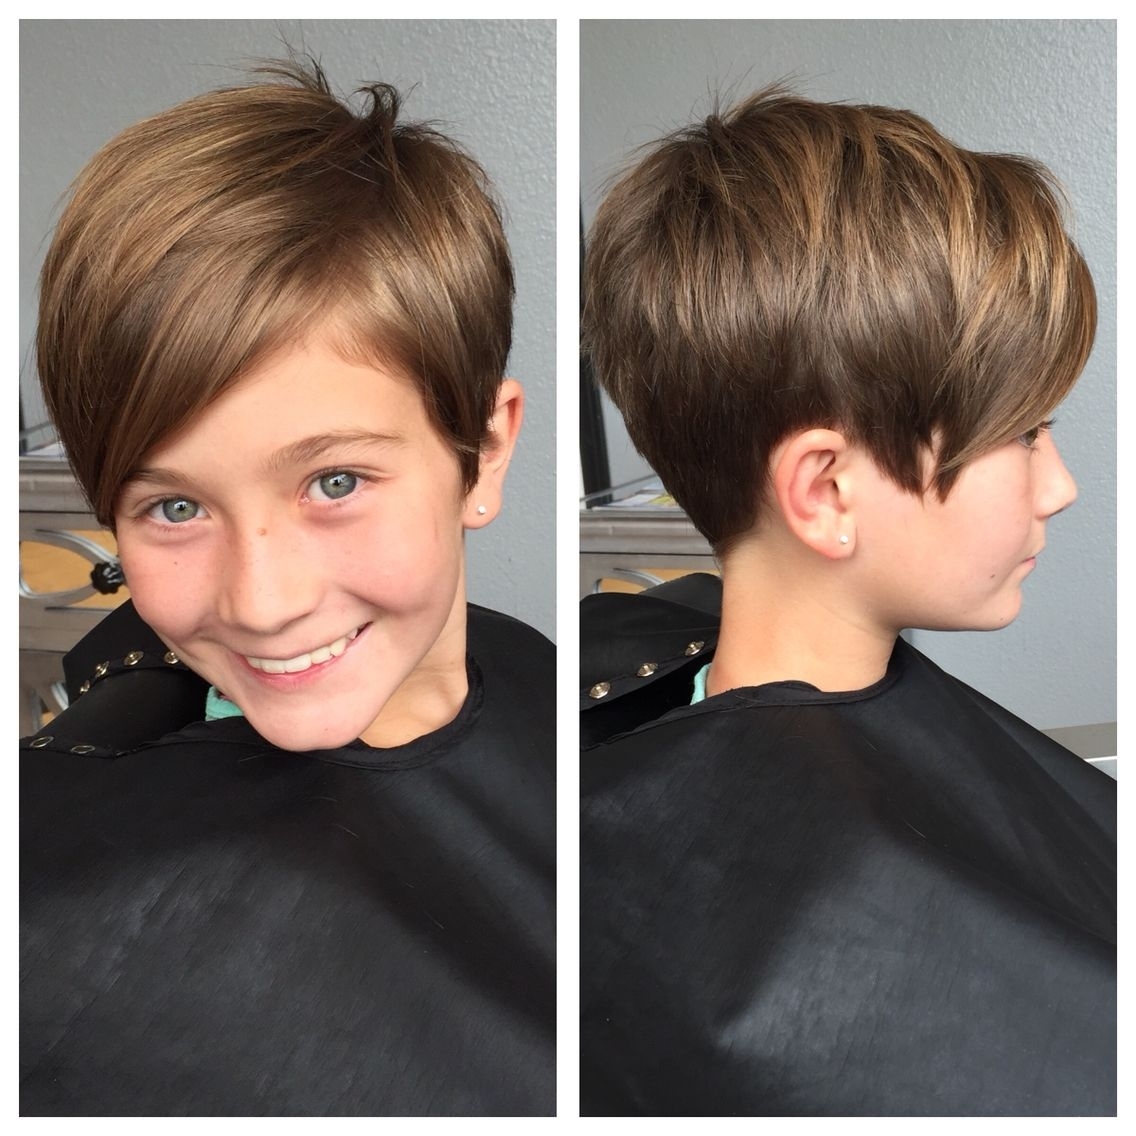 Kids Pixie Haircut | Hair In 2019 | Short Hair For Kids in Pixie Cuts For Six Year Olds